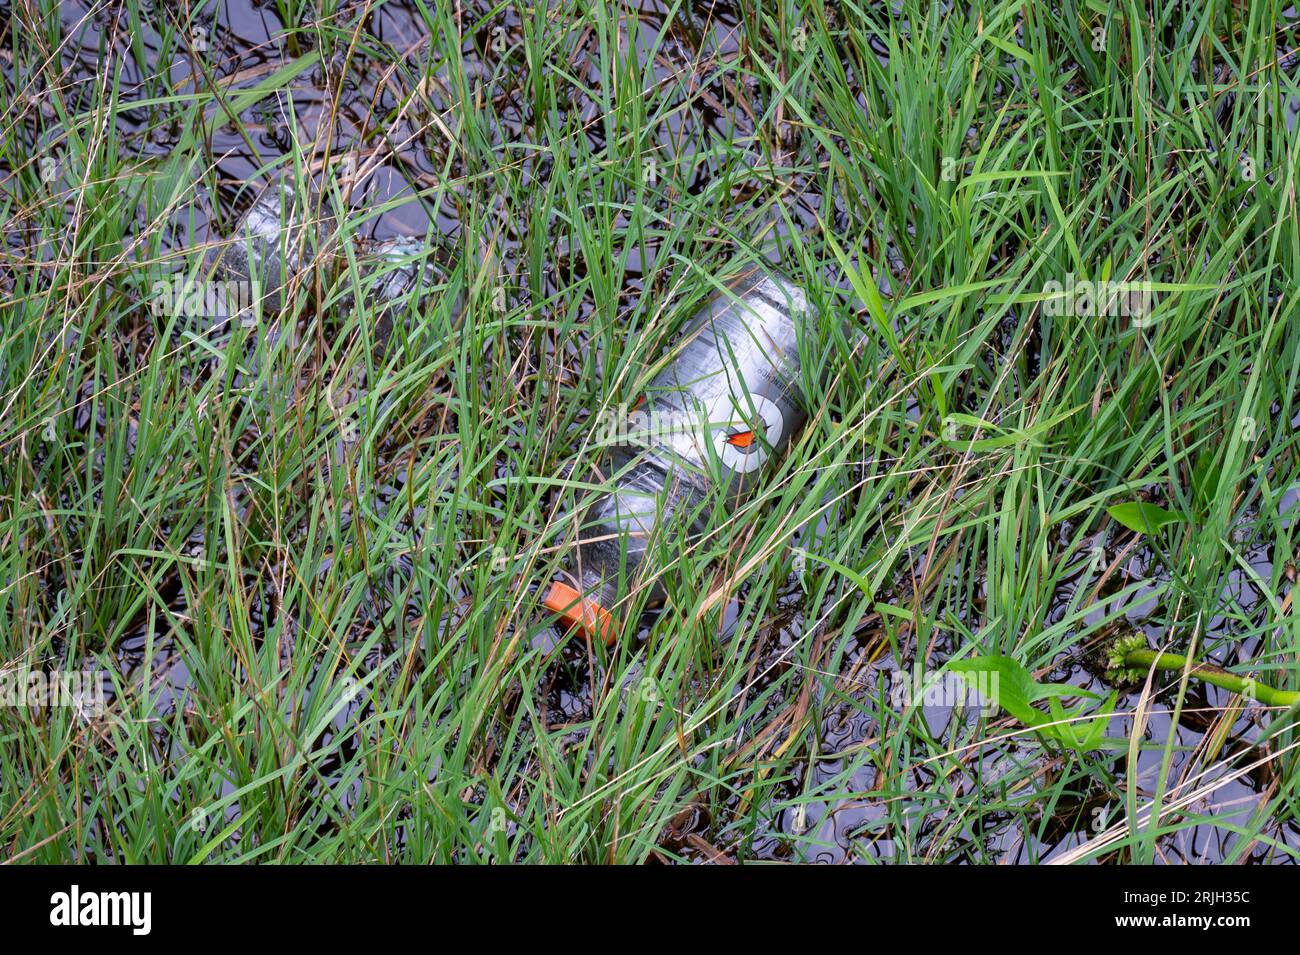 Plastic pollution - two empty plastic bottles floating in the grass and weeds along the Sacandaga River in the Adirondack Mountains, NY USA Stock Photo